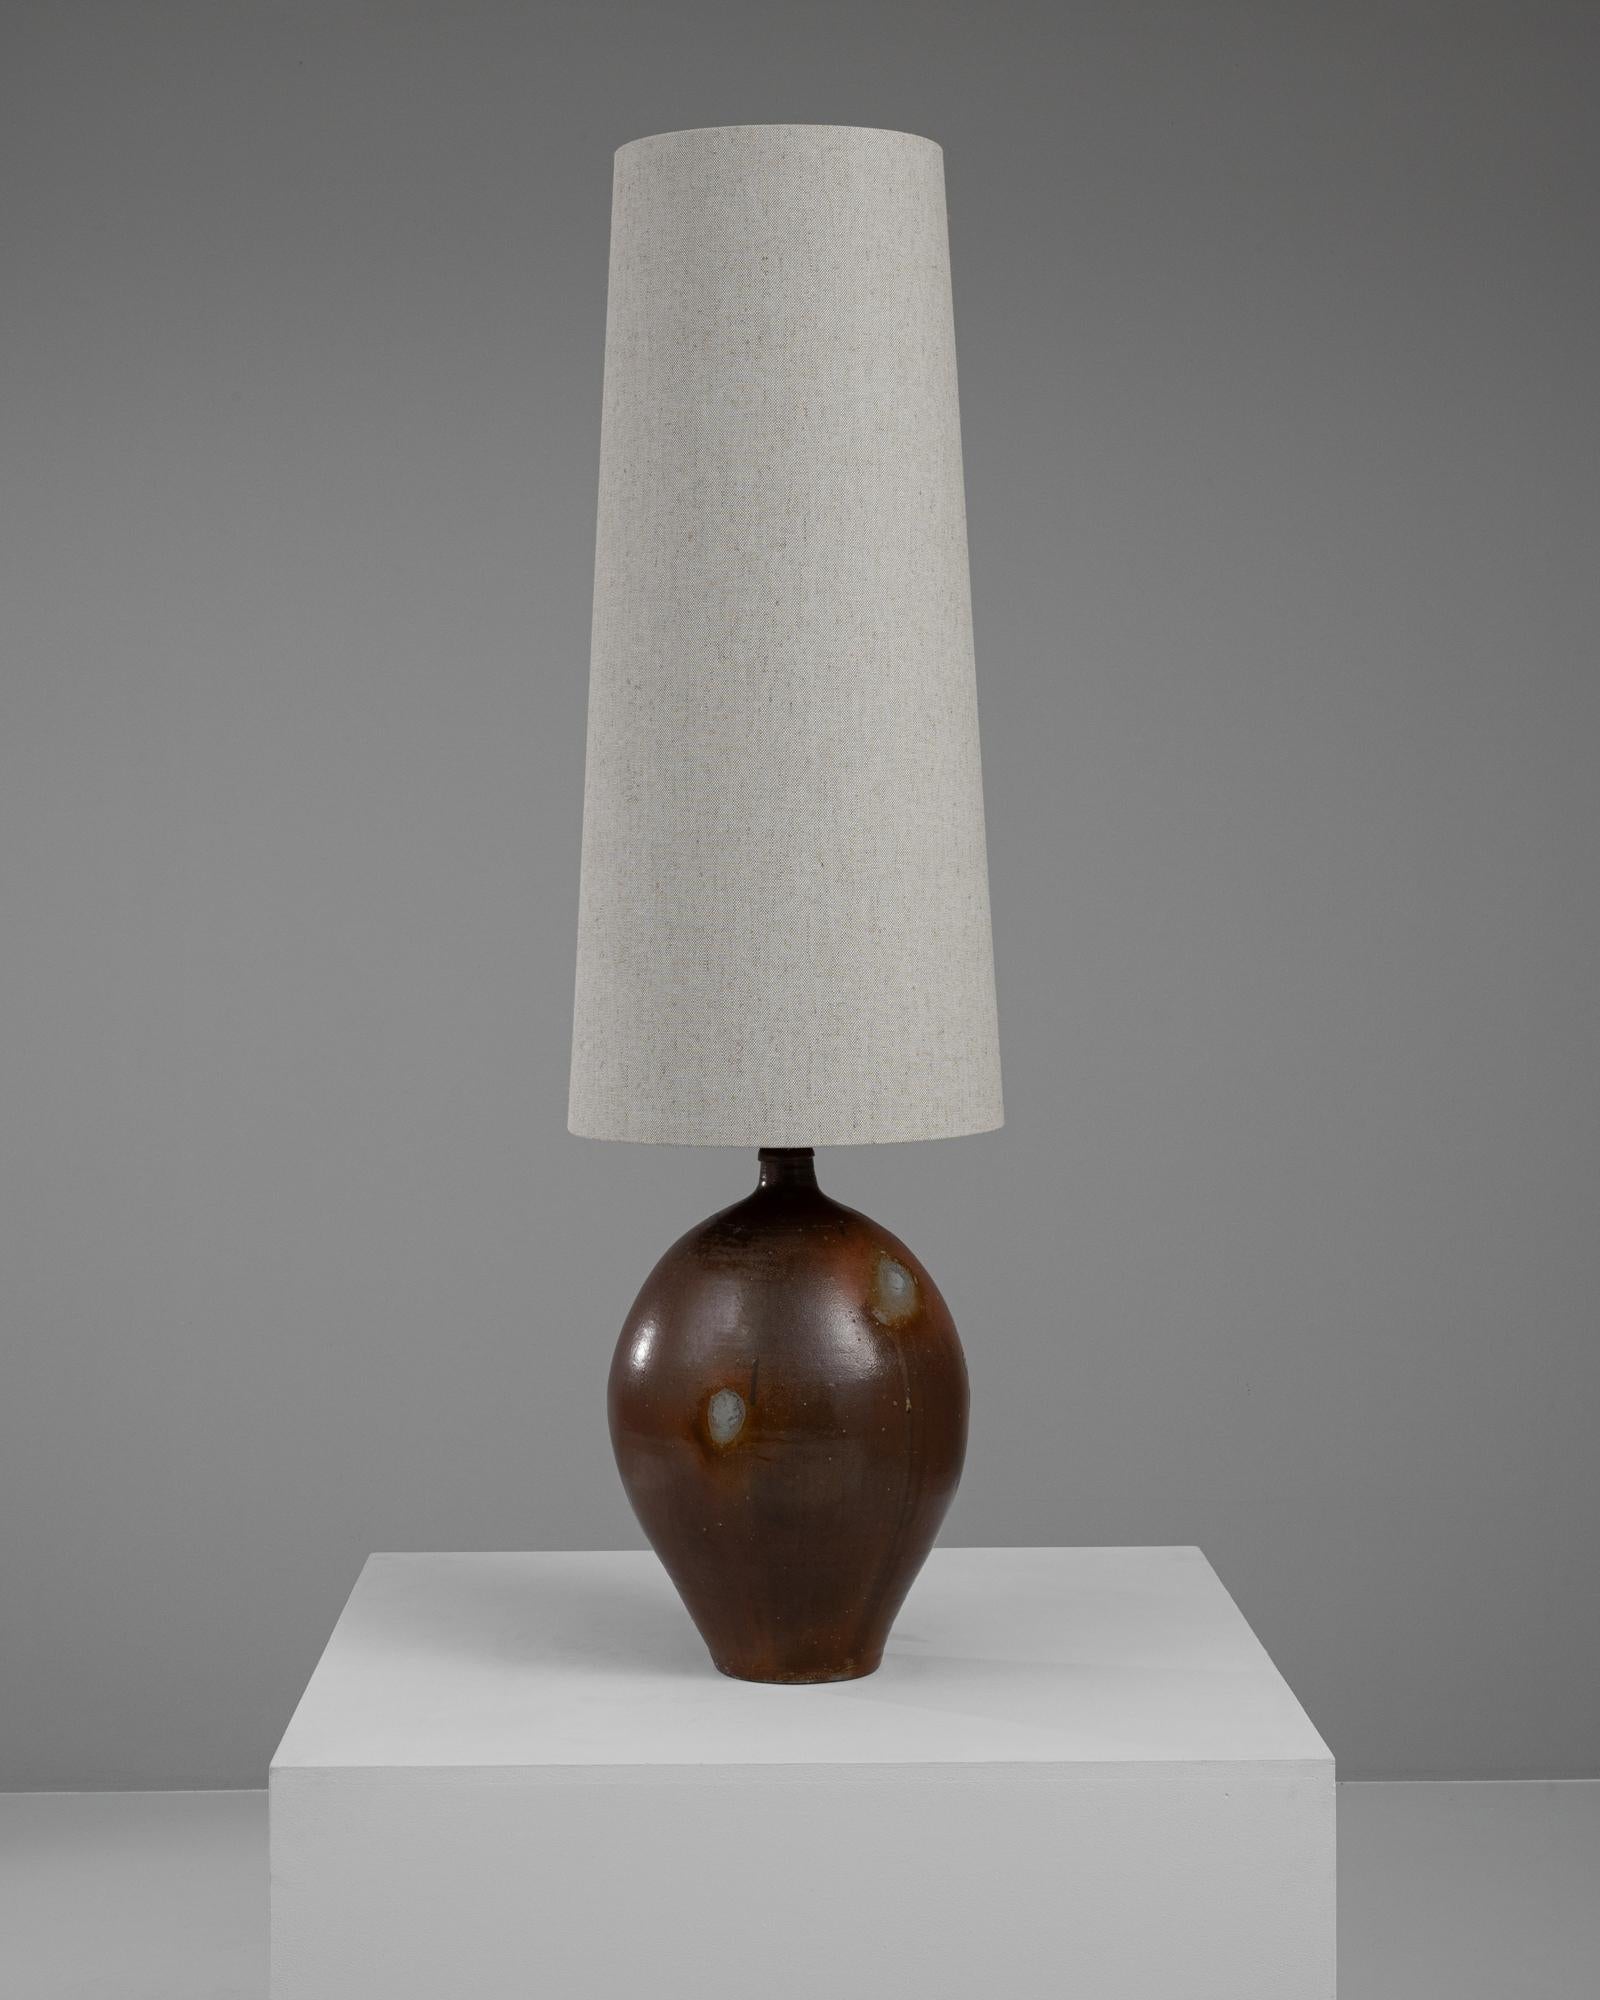 This 20th-century Belgian ceramic table lamp encapsulates a blend of simplicity and rustic charm, making it an ideal addition to any home decor. The base is crafted from high-quality ceramic, featuring a rich, glossy brown finish with natural,